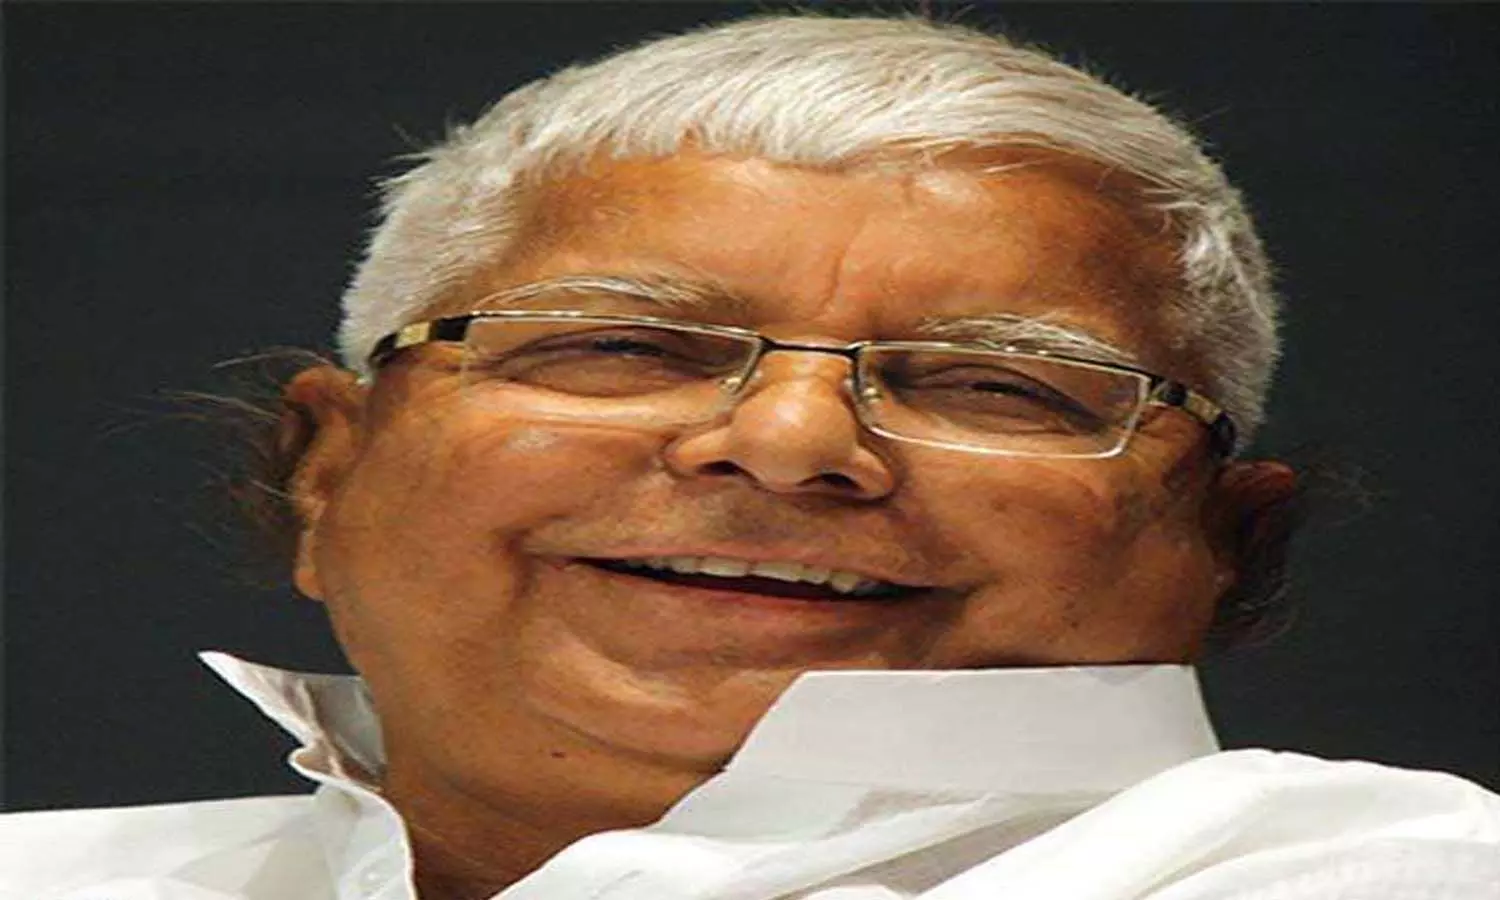 RJD supremo Lalu Prasad Yadavs birthday is on June 11 and the discussion in the political corridors